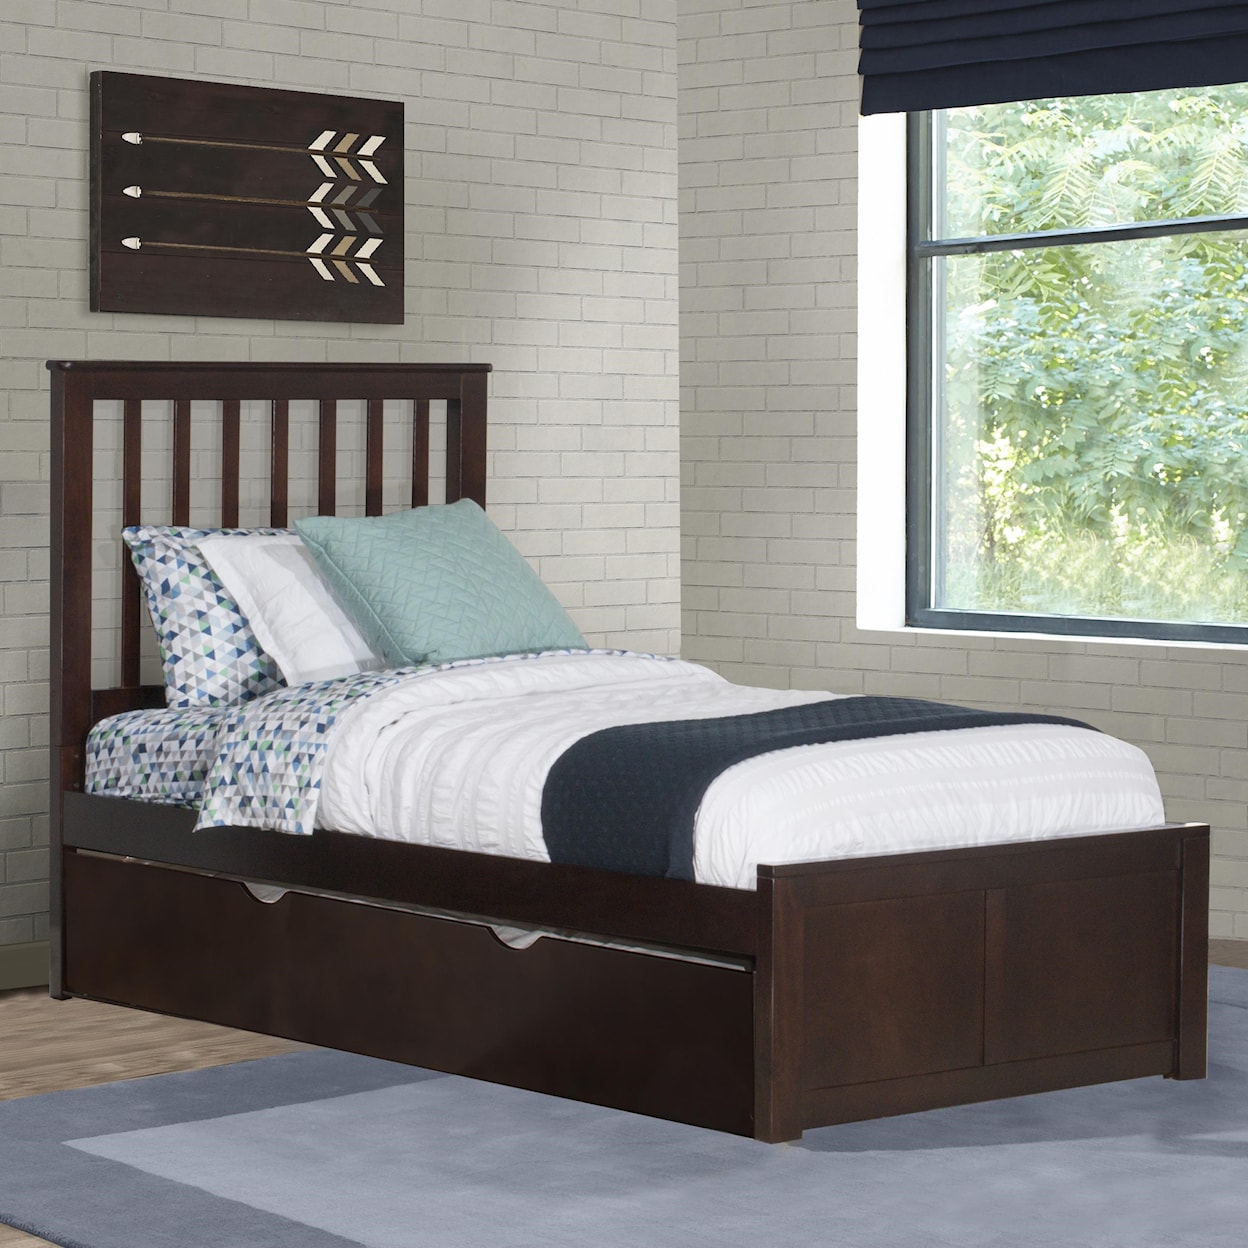 Hillsdale Schoolhouse Twin Trundle Bed